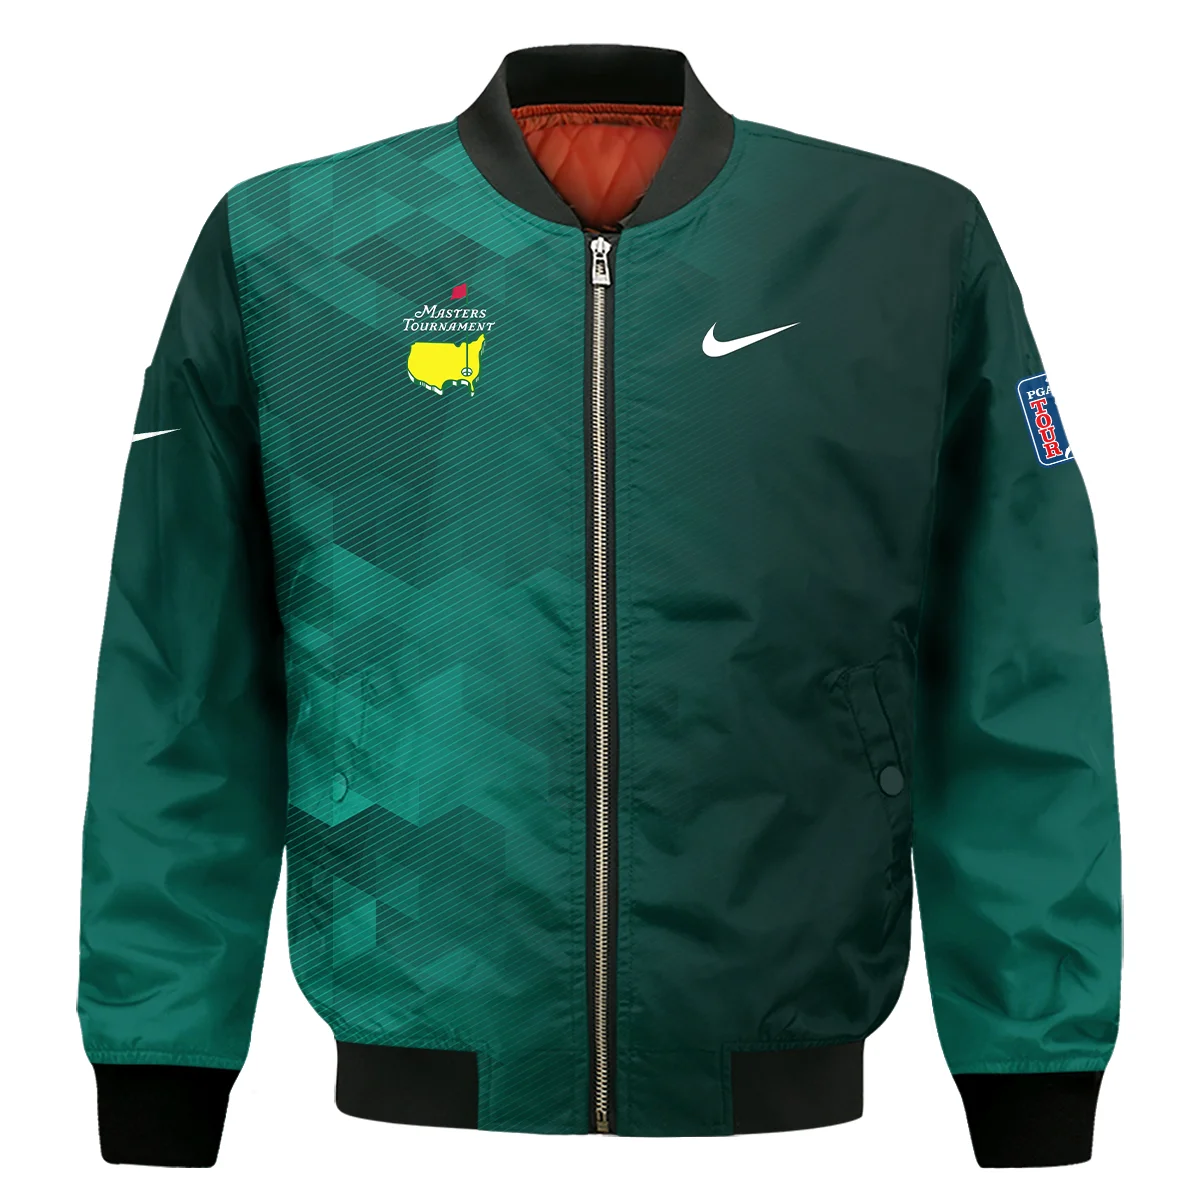 Nike Golf Sport Dark Green Gradient Abstract Background Masters Tournament Bomber Jacket Style Classic Bomber Jacket